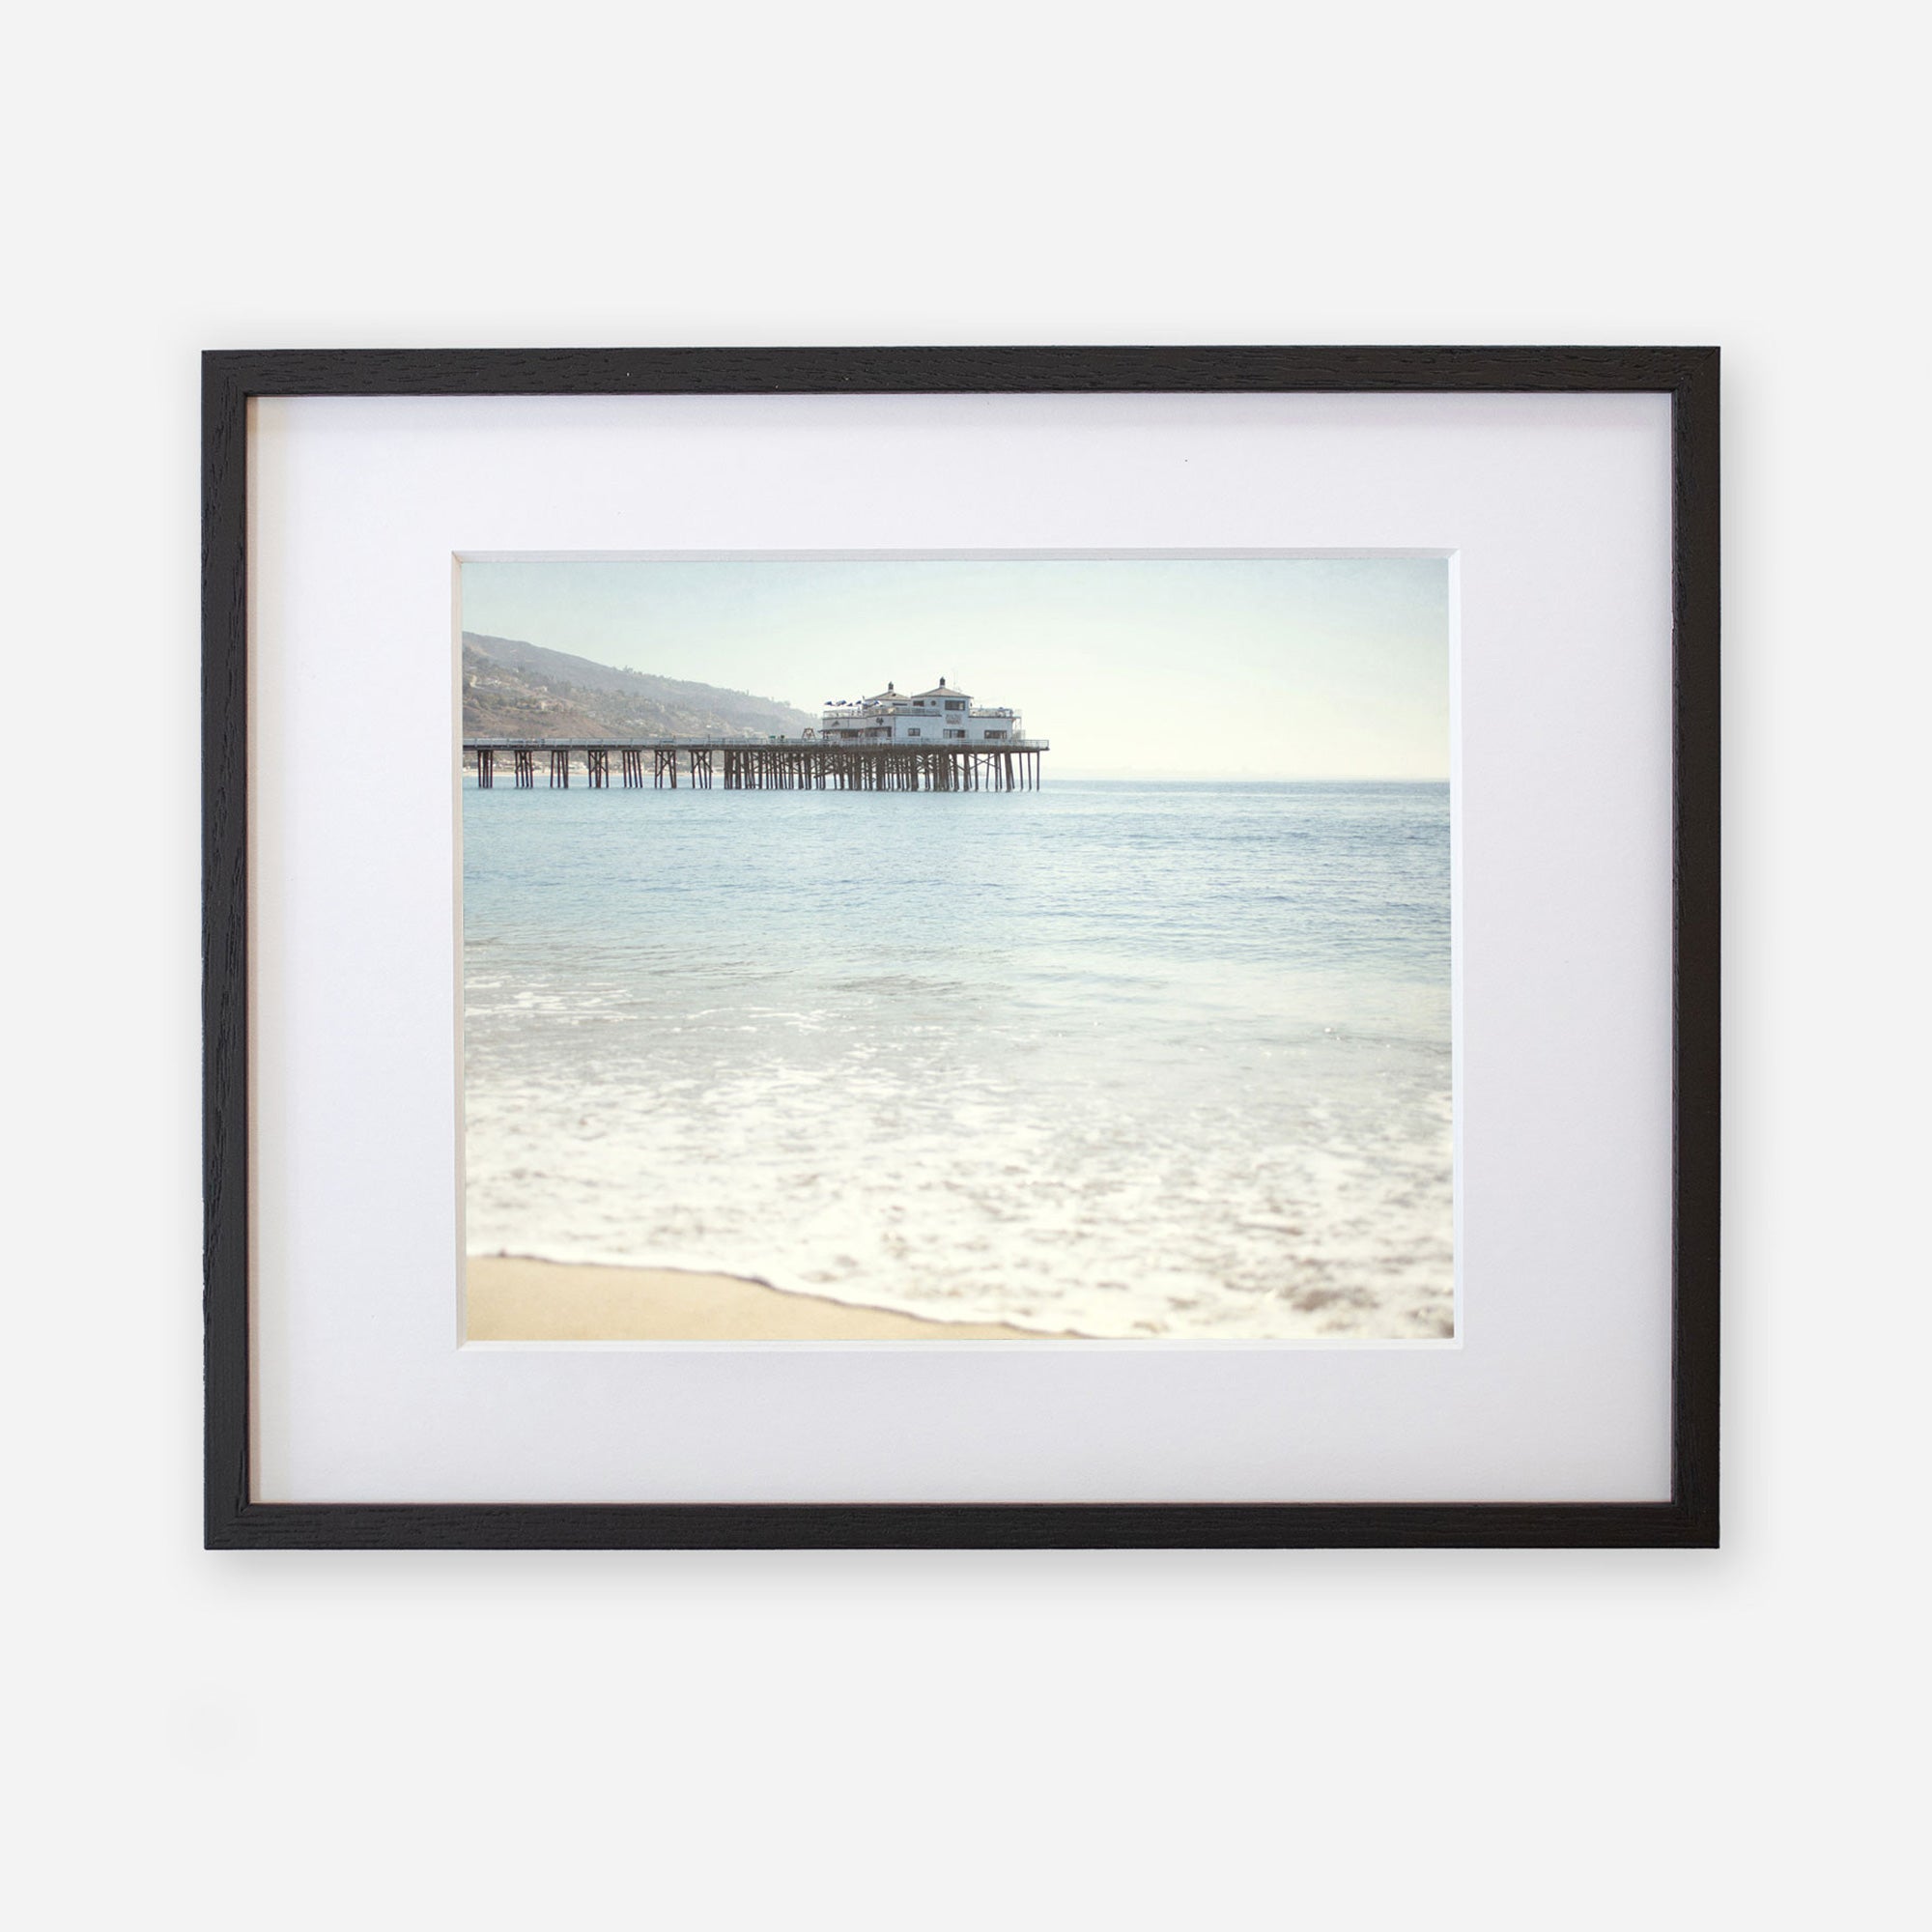 A framed photograph of a serene beach scene, showing gentle waves lapping against the shore with &#39;Malibu Pier&#39; extending into a calm sea under a clear sky by Offley Green.